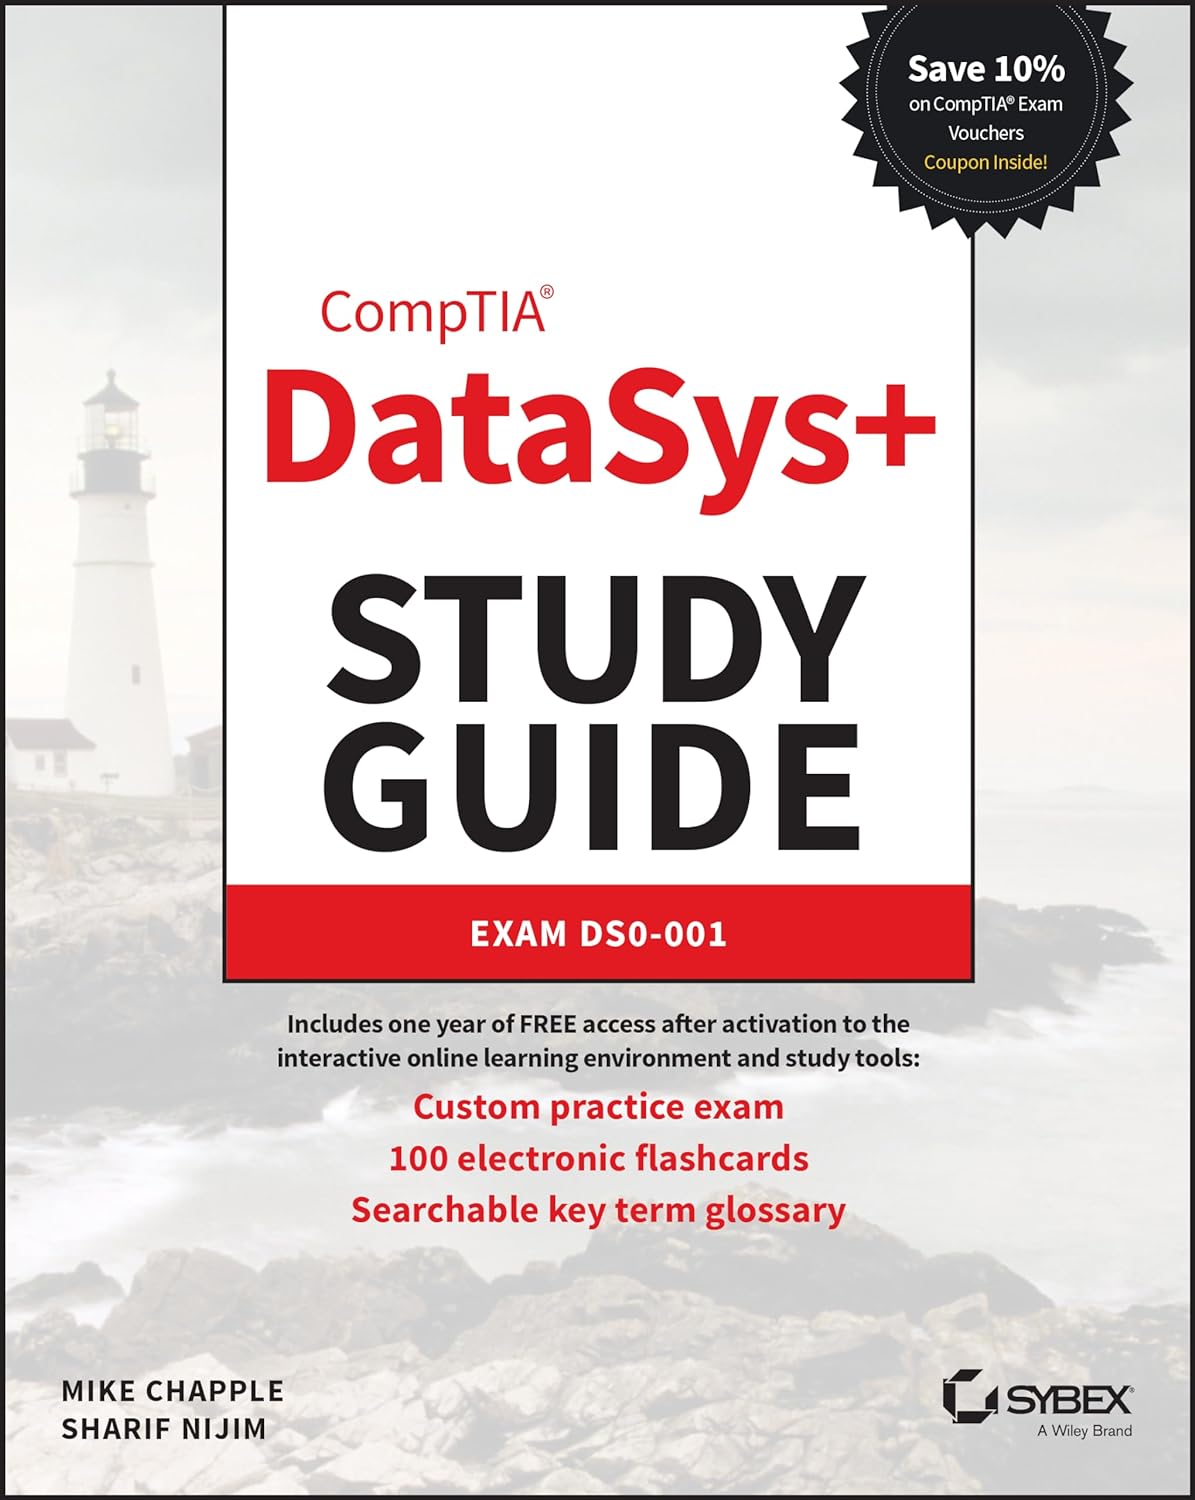 (EBook PDF)CompTIA DataSys+ Study Guide: Exam DS0-001 by Mike Chapple, Sharif Nijim